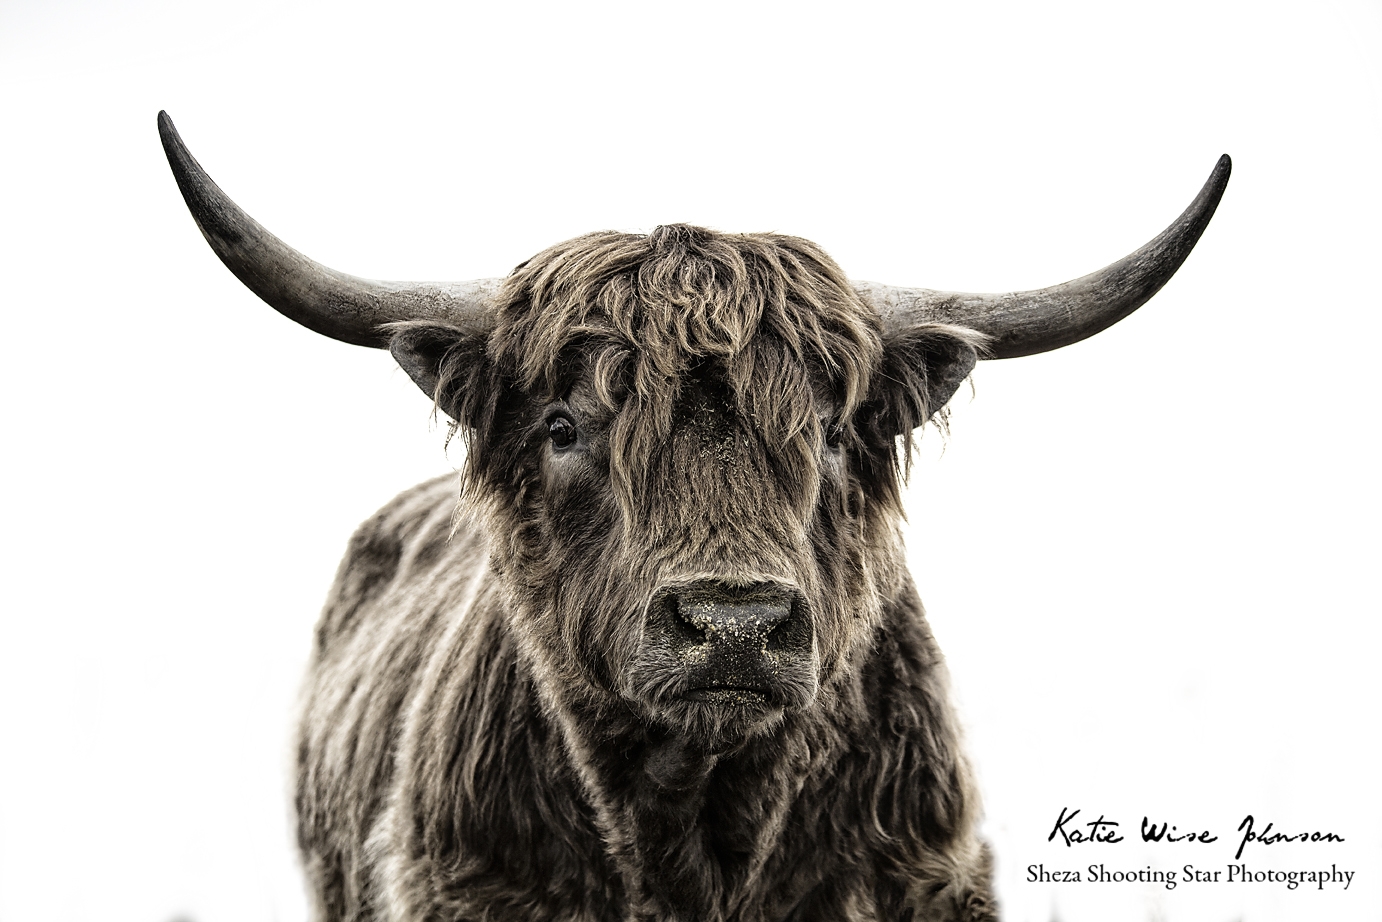 Mouse the Highland Bull 2